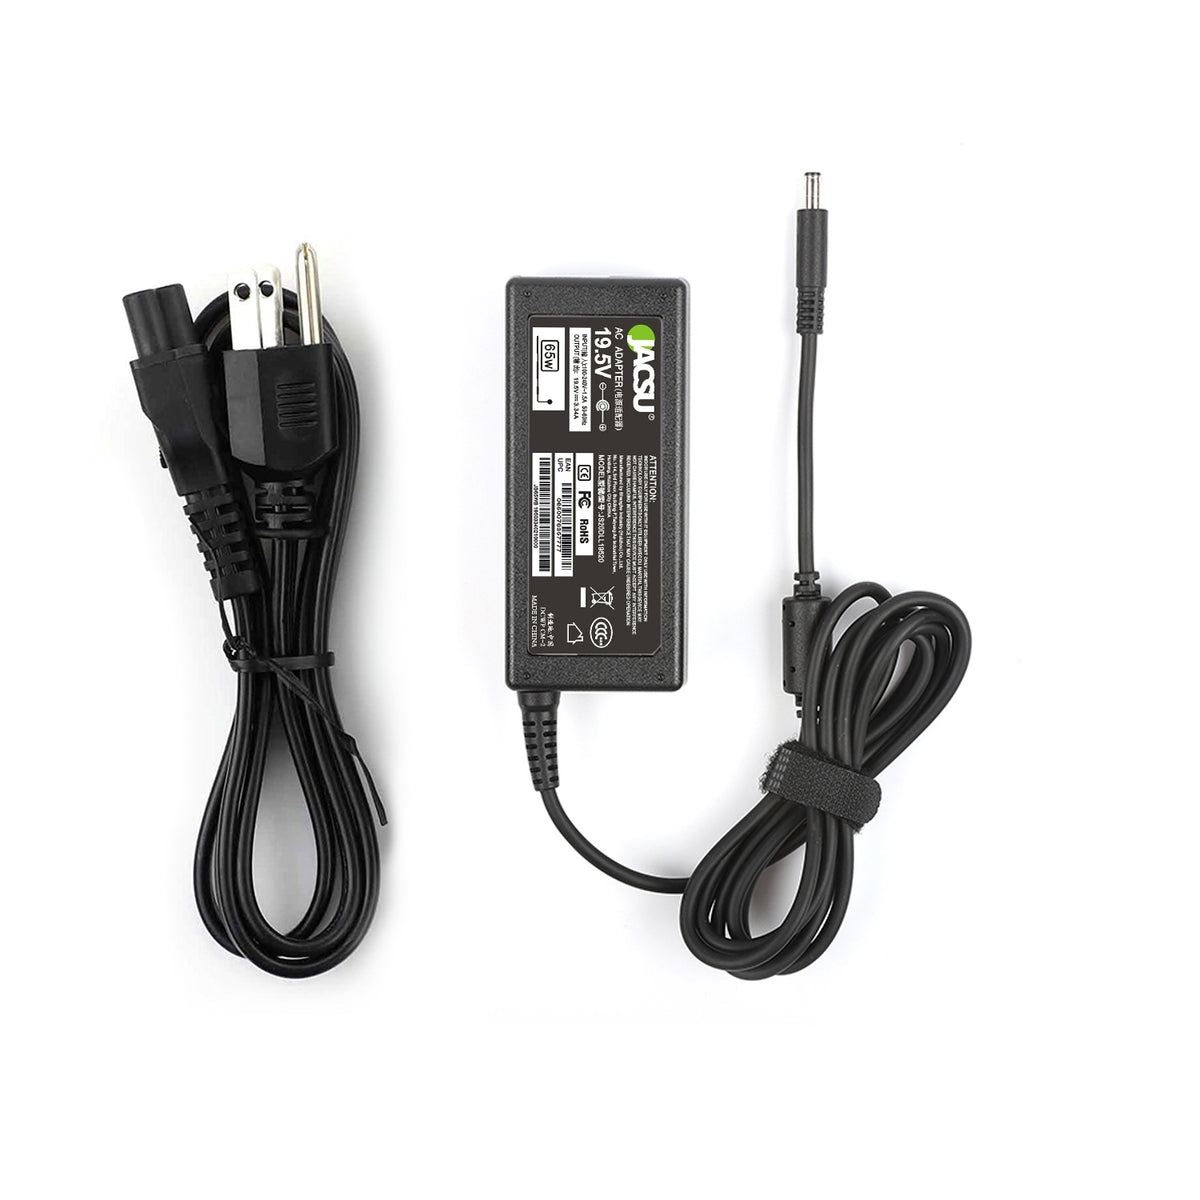 Jacsu 19.5V 3.34A 4.5*3.0mm 65W Laptop AC Power Adapter Charger for Dell Inspiron 15 5558 3558 3551 3552 5551